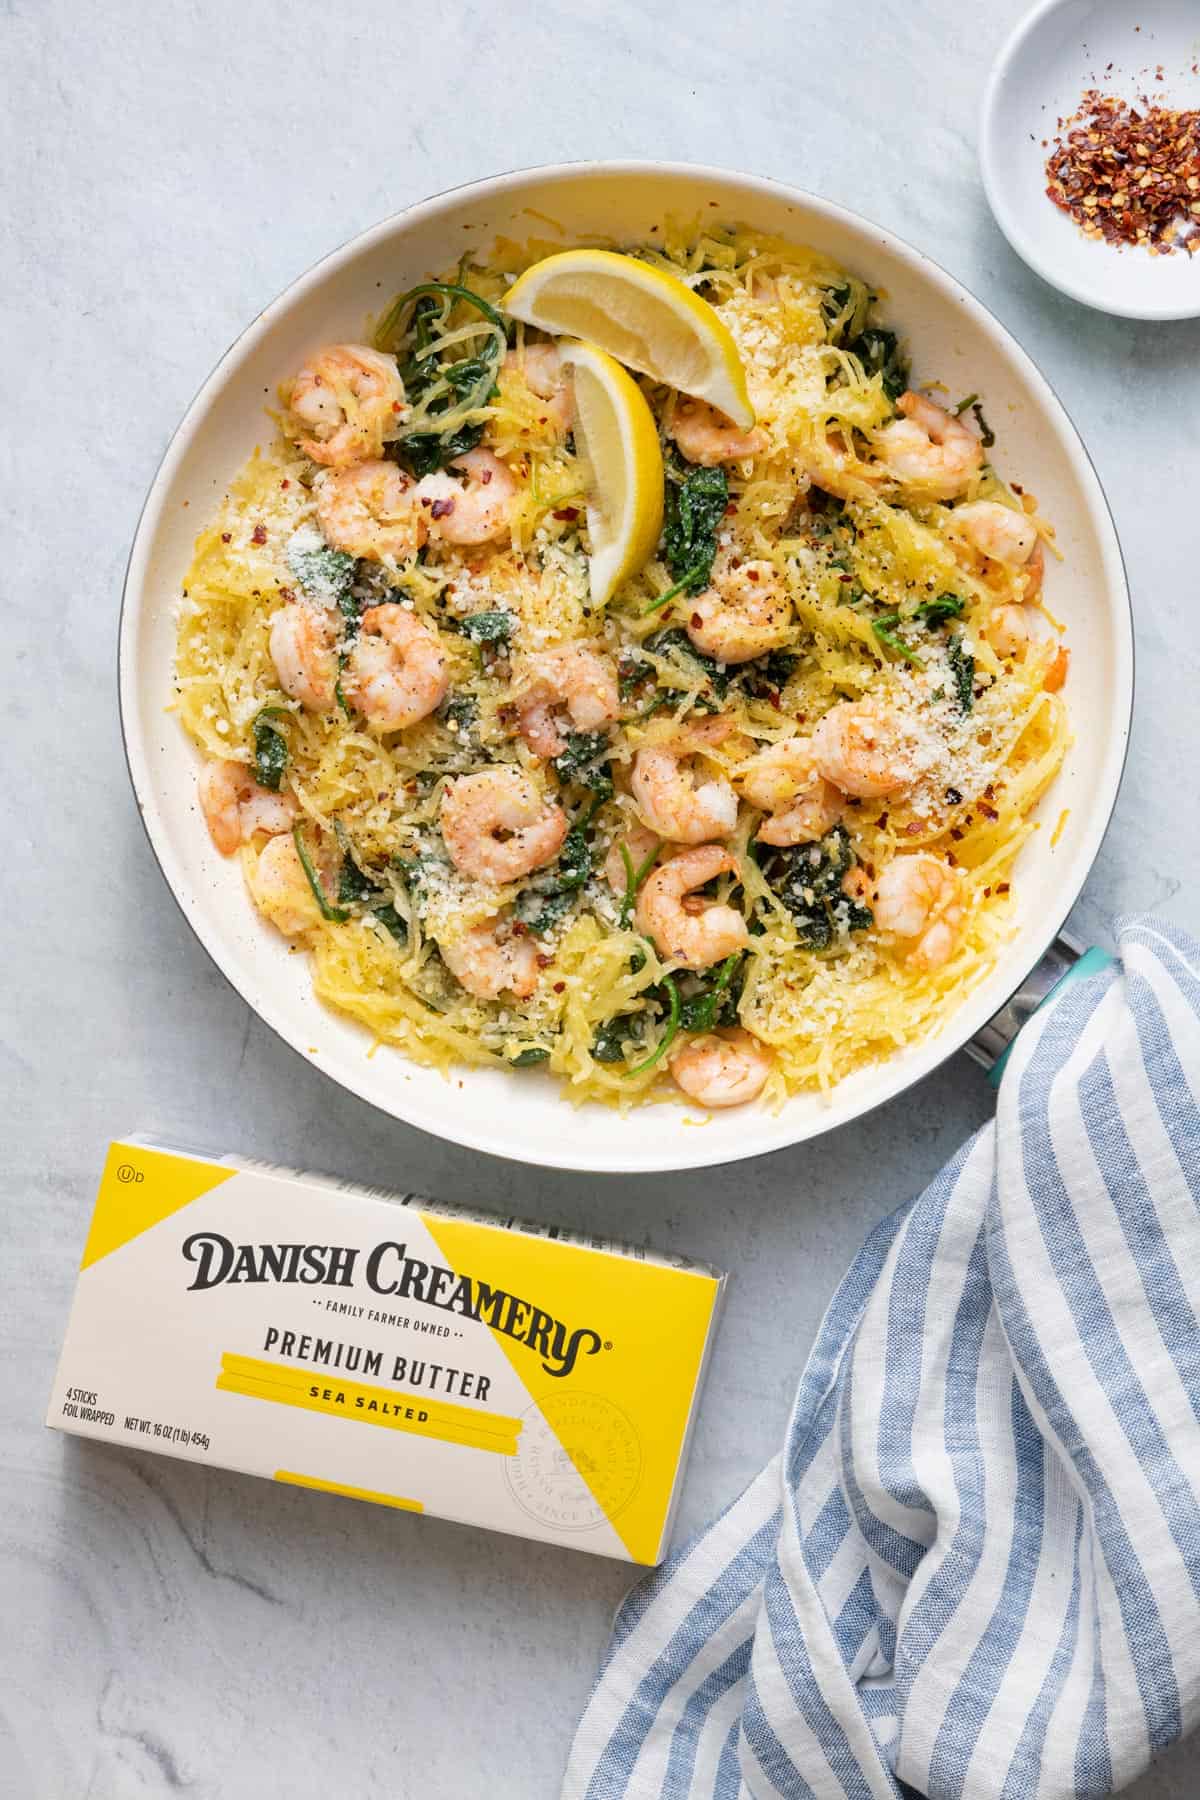 Spaghetti squash shrimp scampi finished product with crushed red pepper in small bowl and package of Danish Creamery on the side